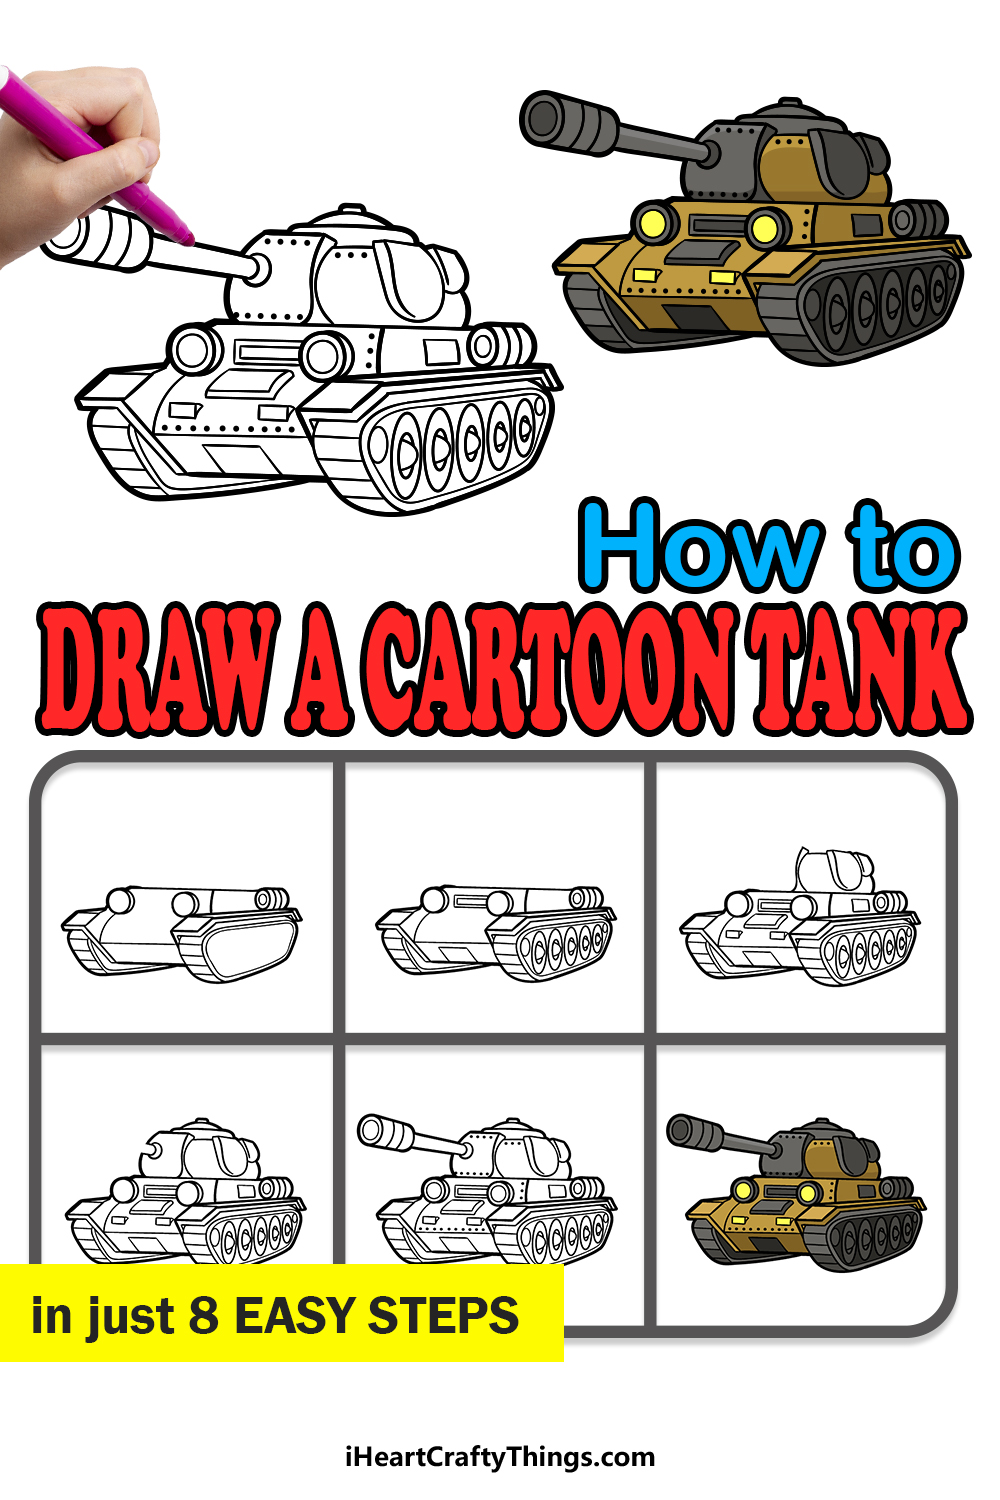 how to draw a cartoon tank in 8 easy steps